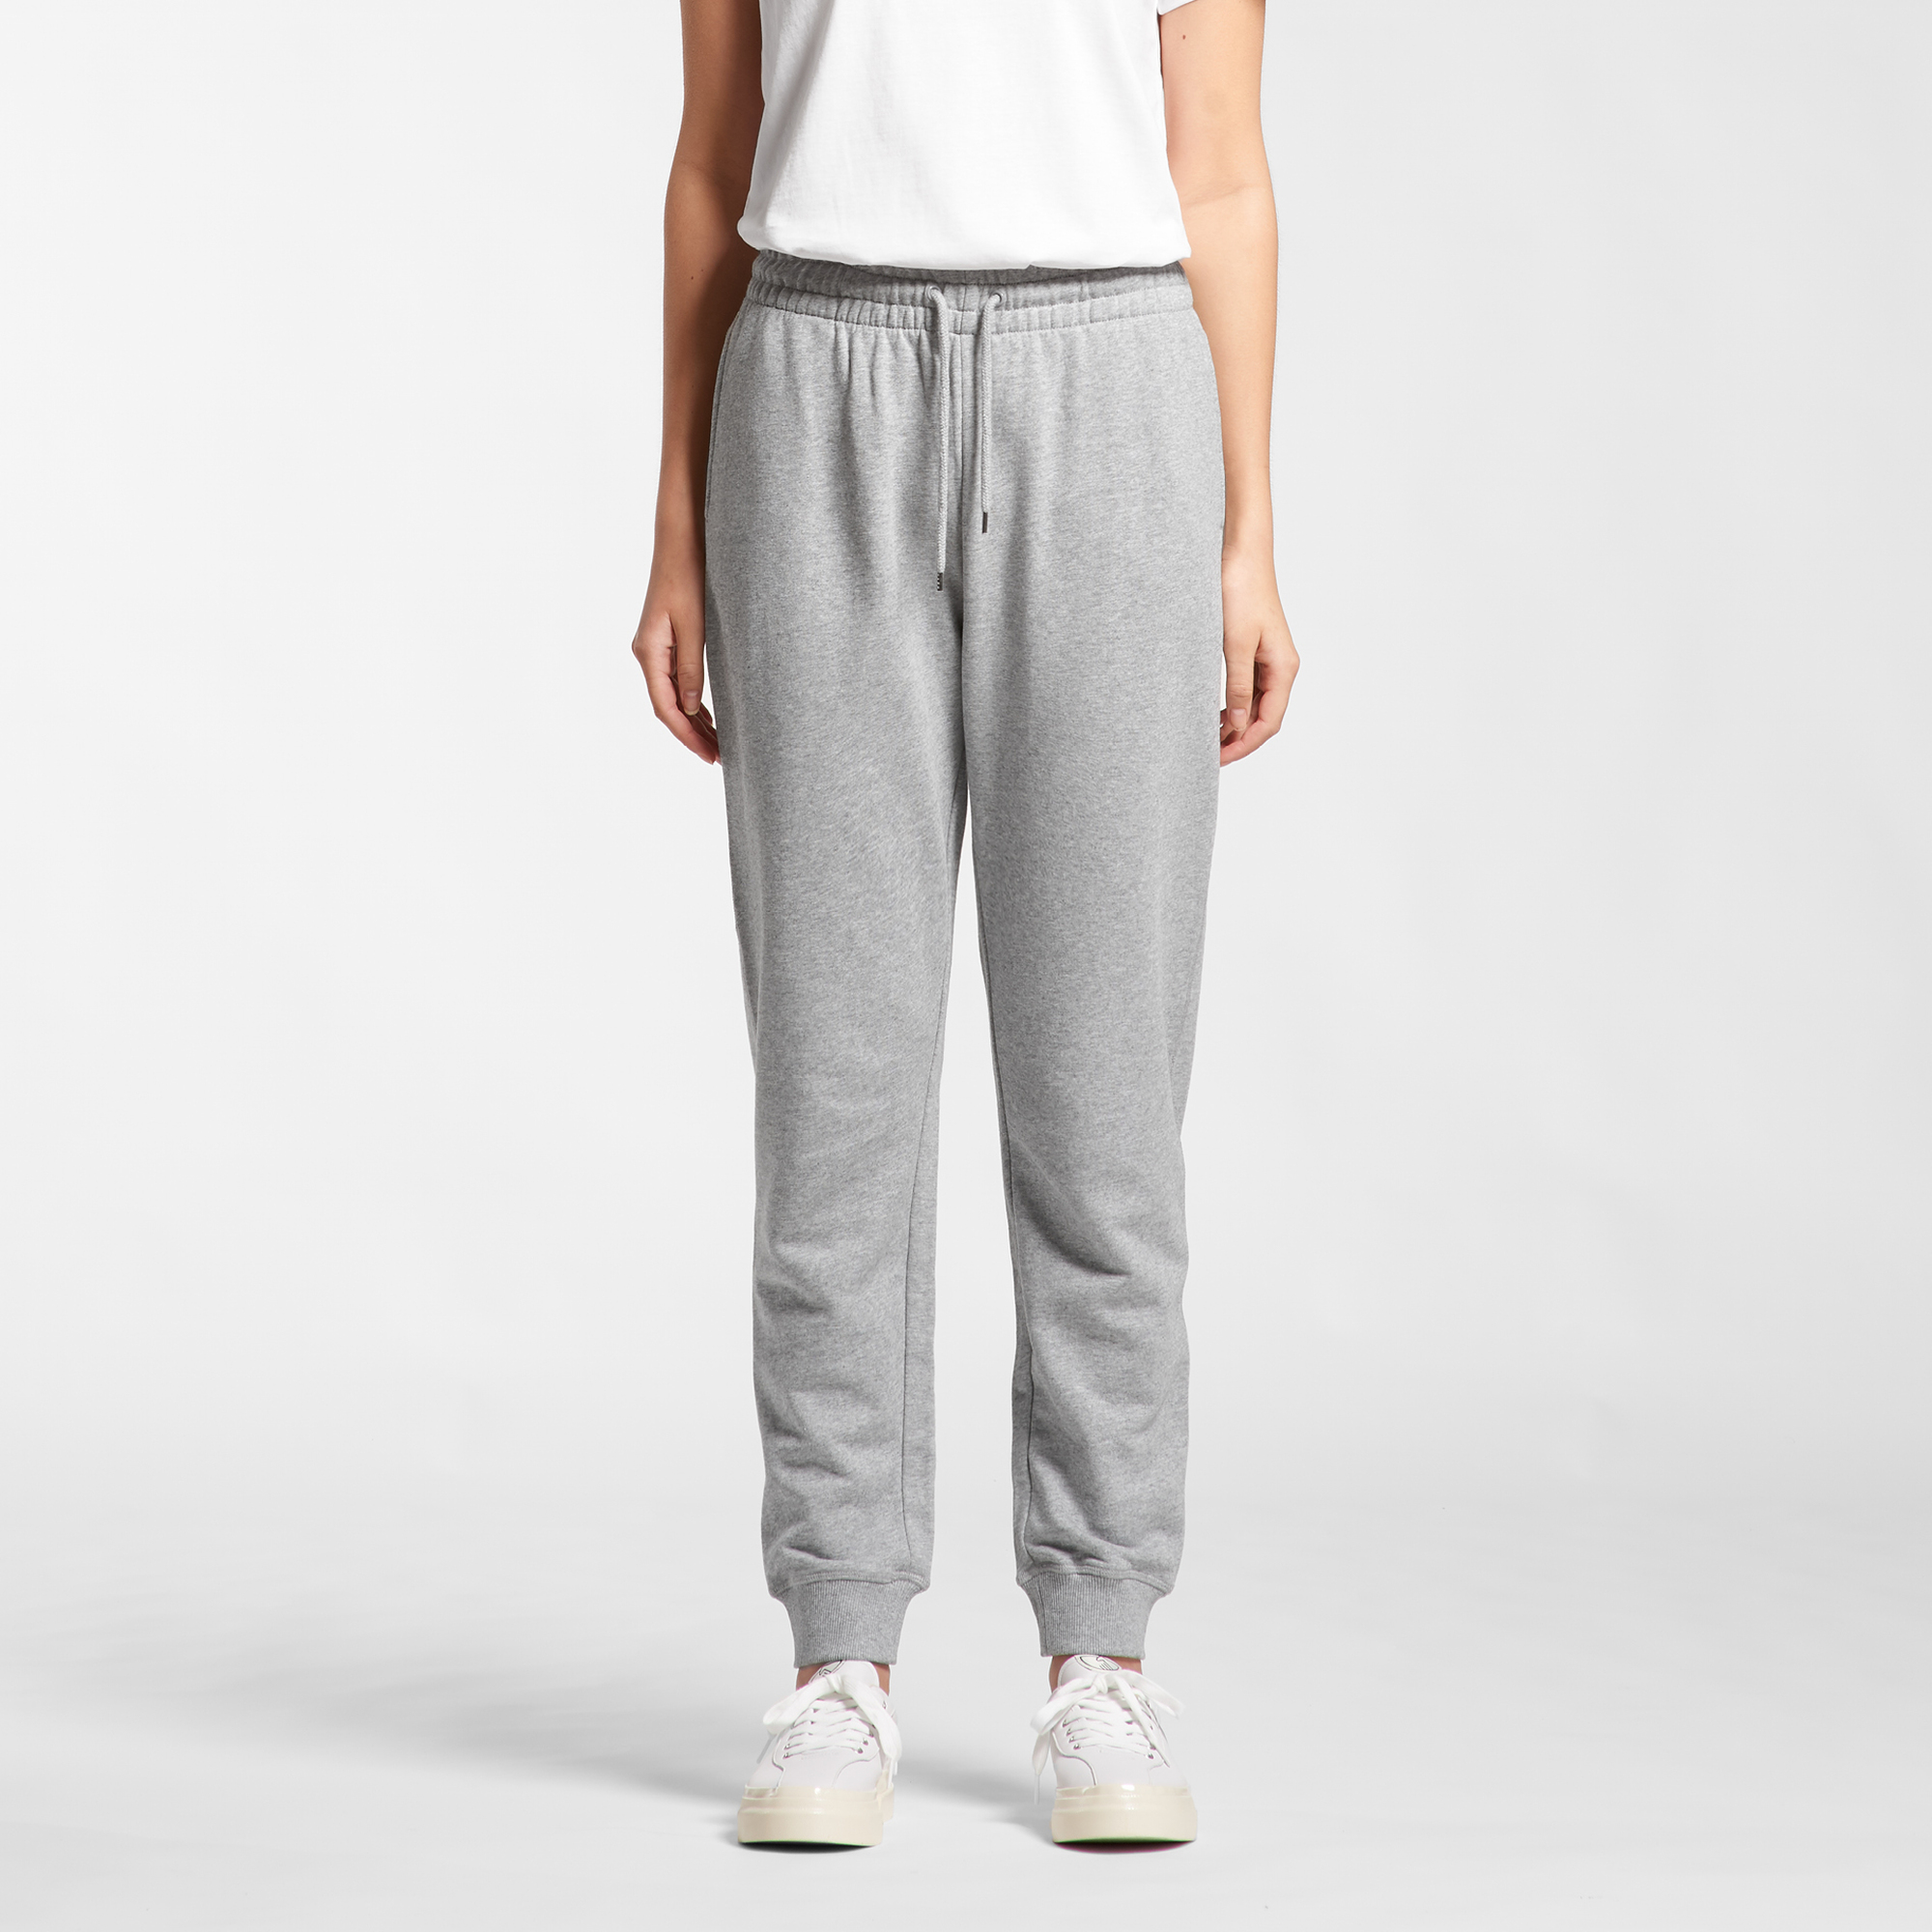 Women's Premium Track Pants | Branded Track Pants | Printed Track Pants NZ | AS Colour | Withers & Co